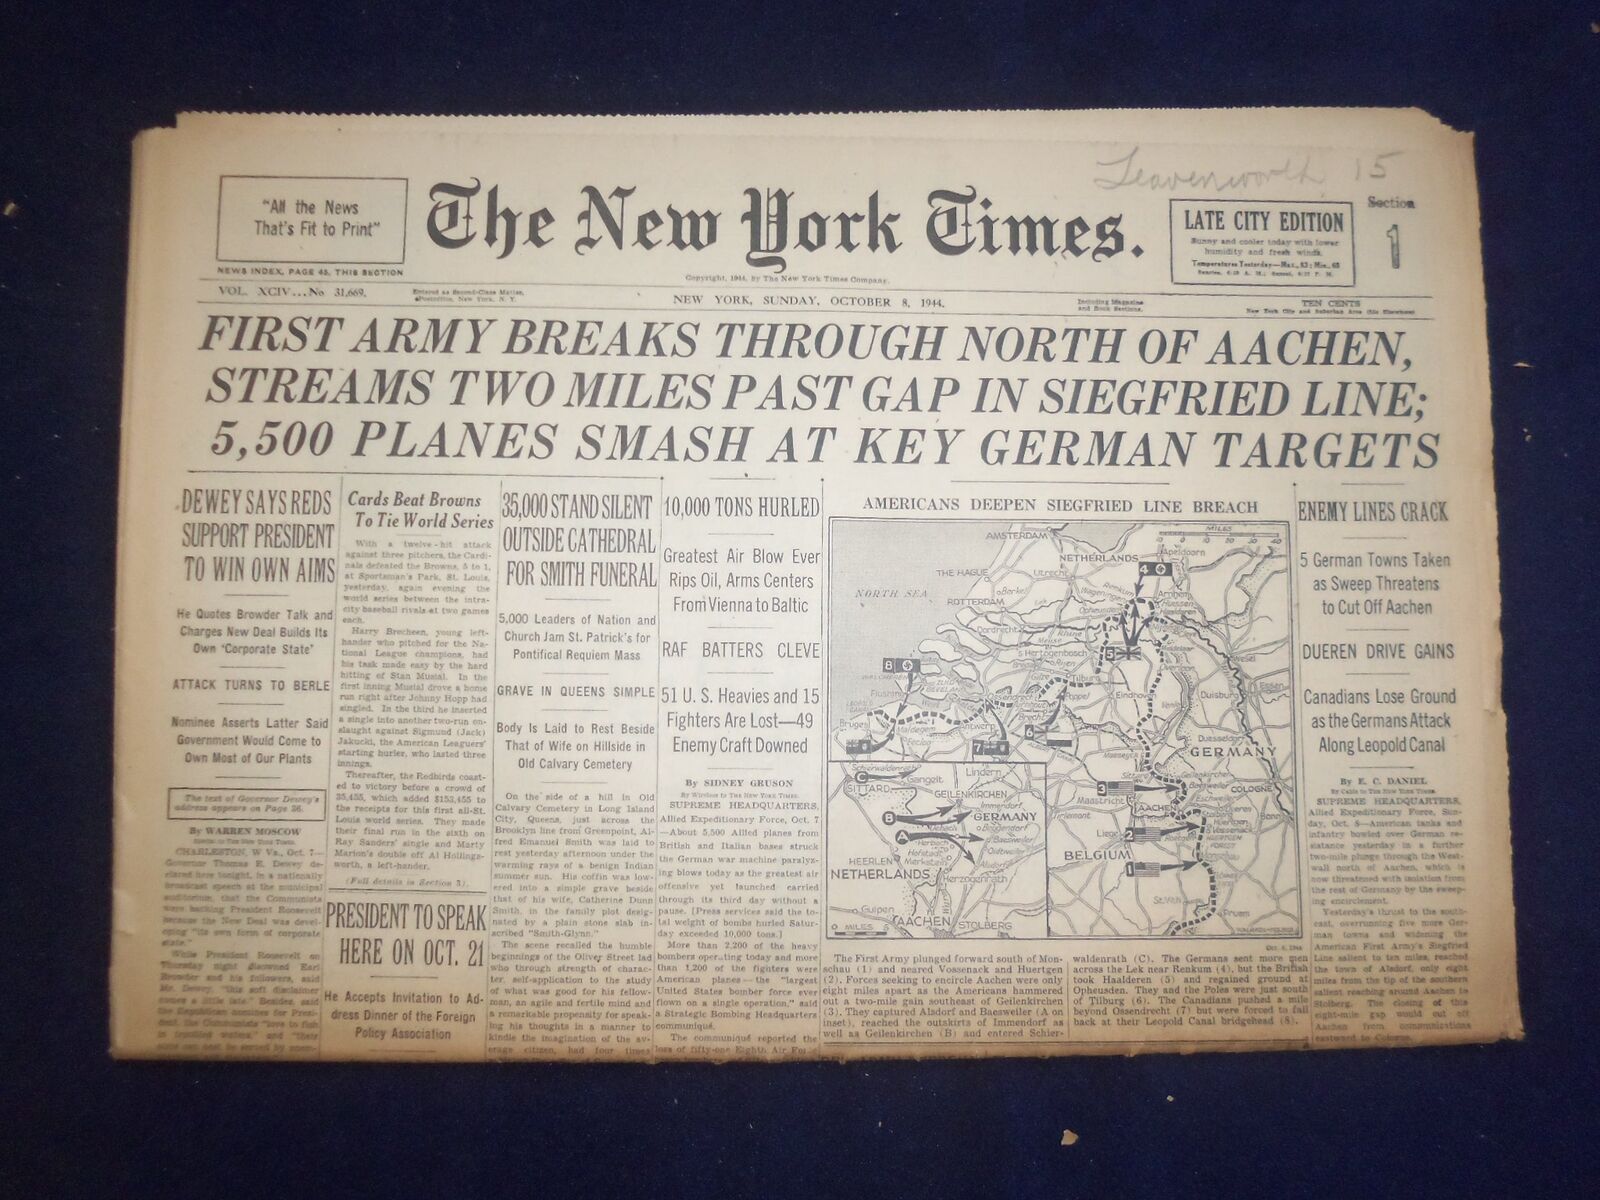 1944 OCT 8 NEW YORK TIMES - FIRST ARMY BREAKS THROUGH NORTH OF AACHEN - NP 6635